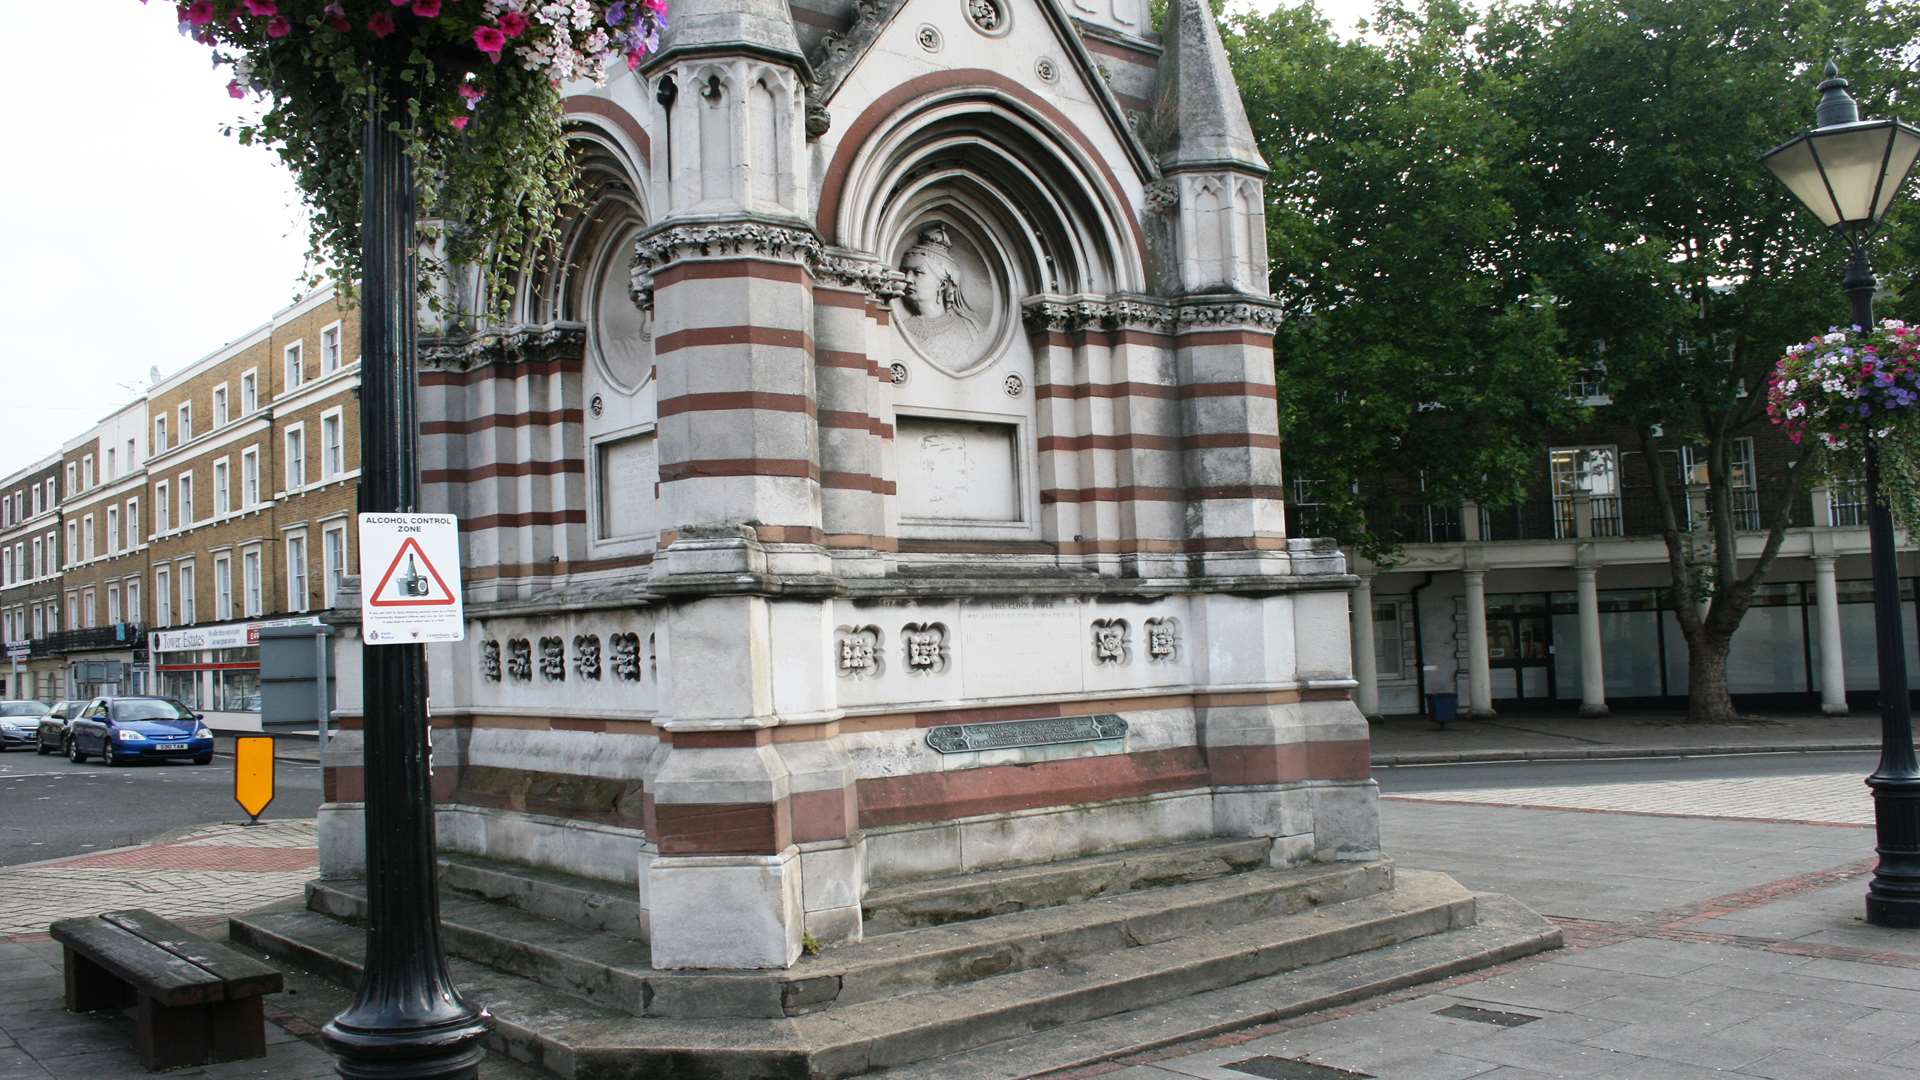 Gravesend Clock Tower has become a gathering point for problem drinkers